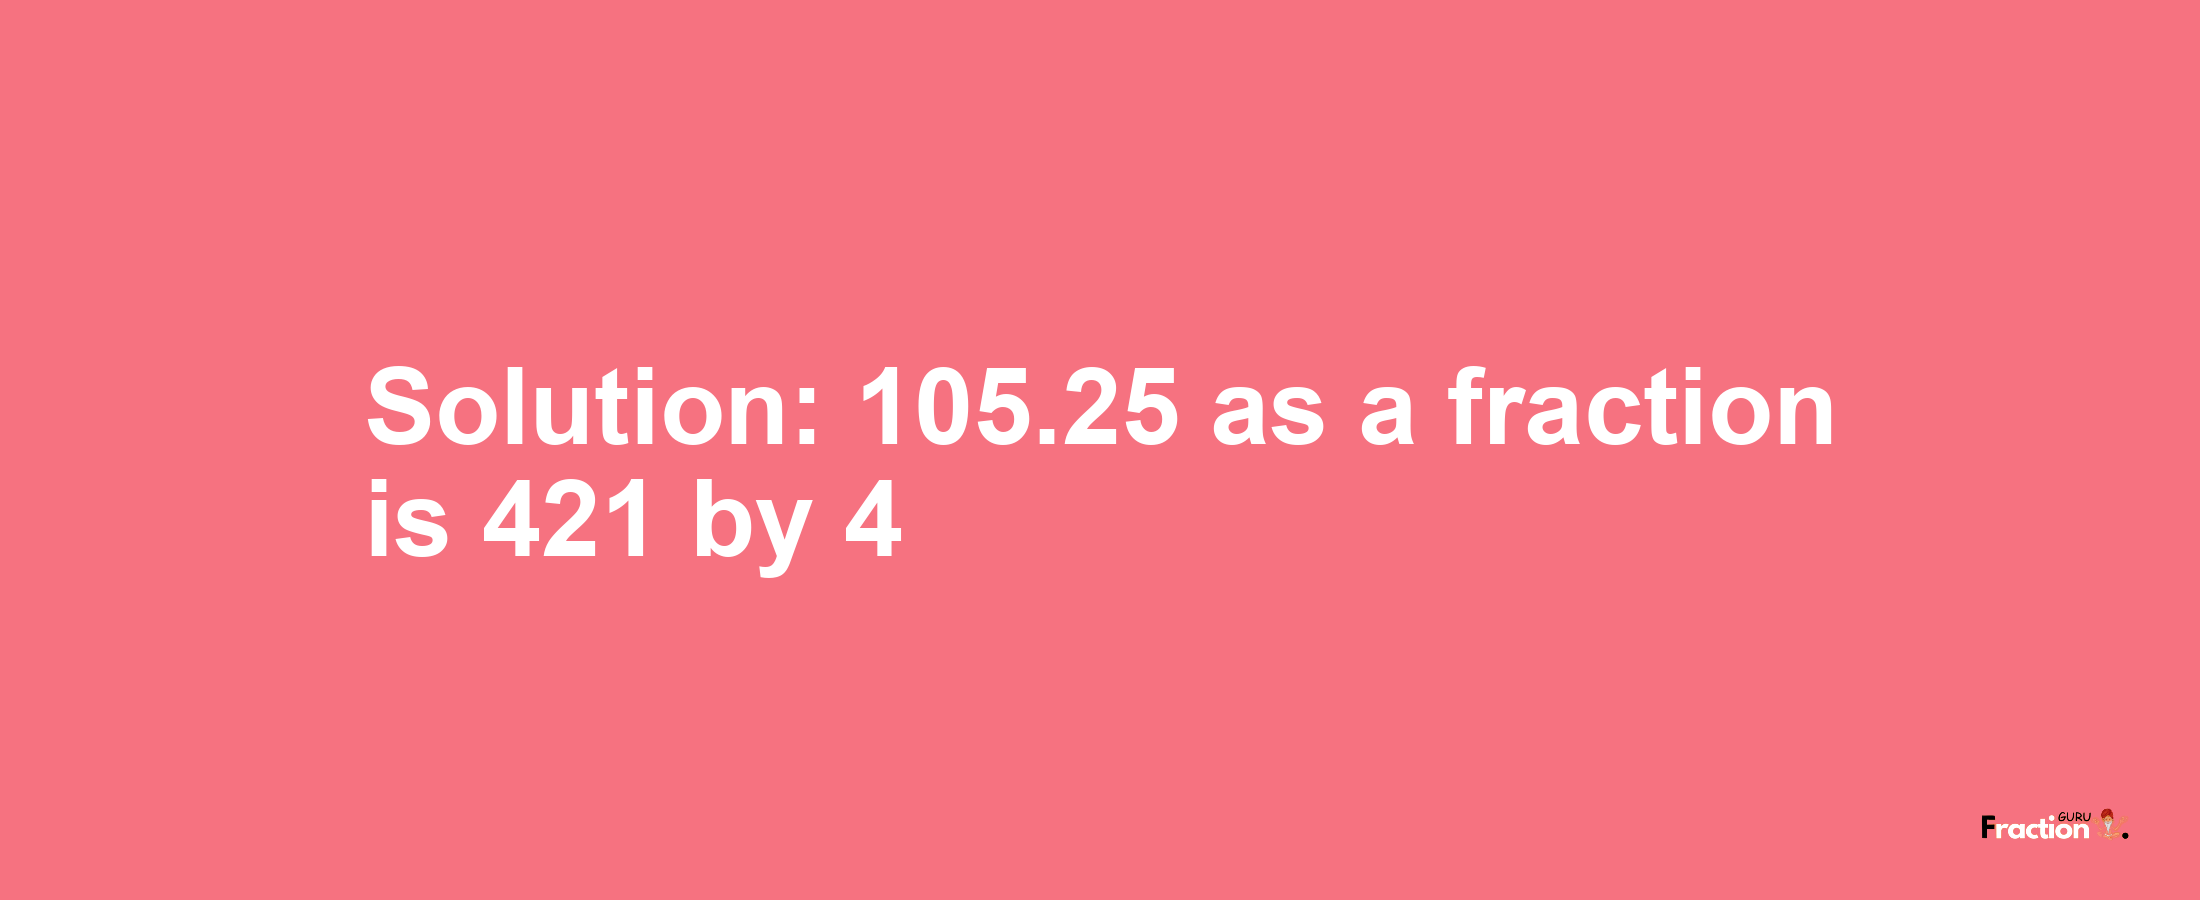 Solution:105.25 as a fraction is 421/4